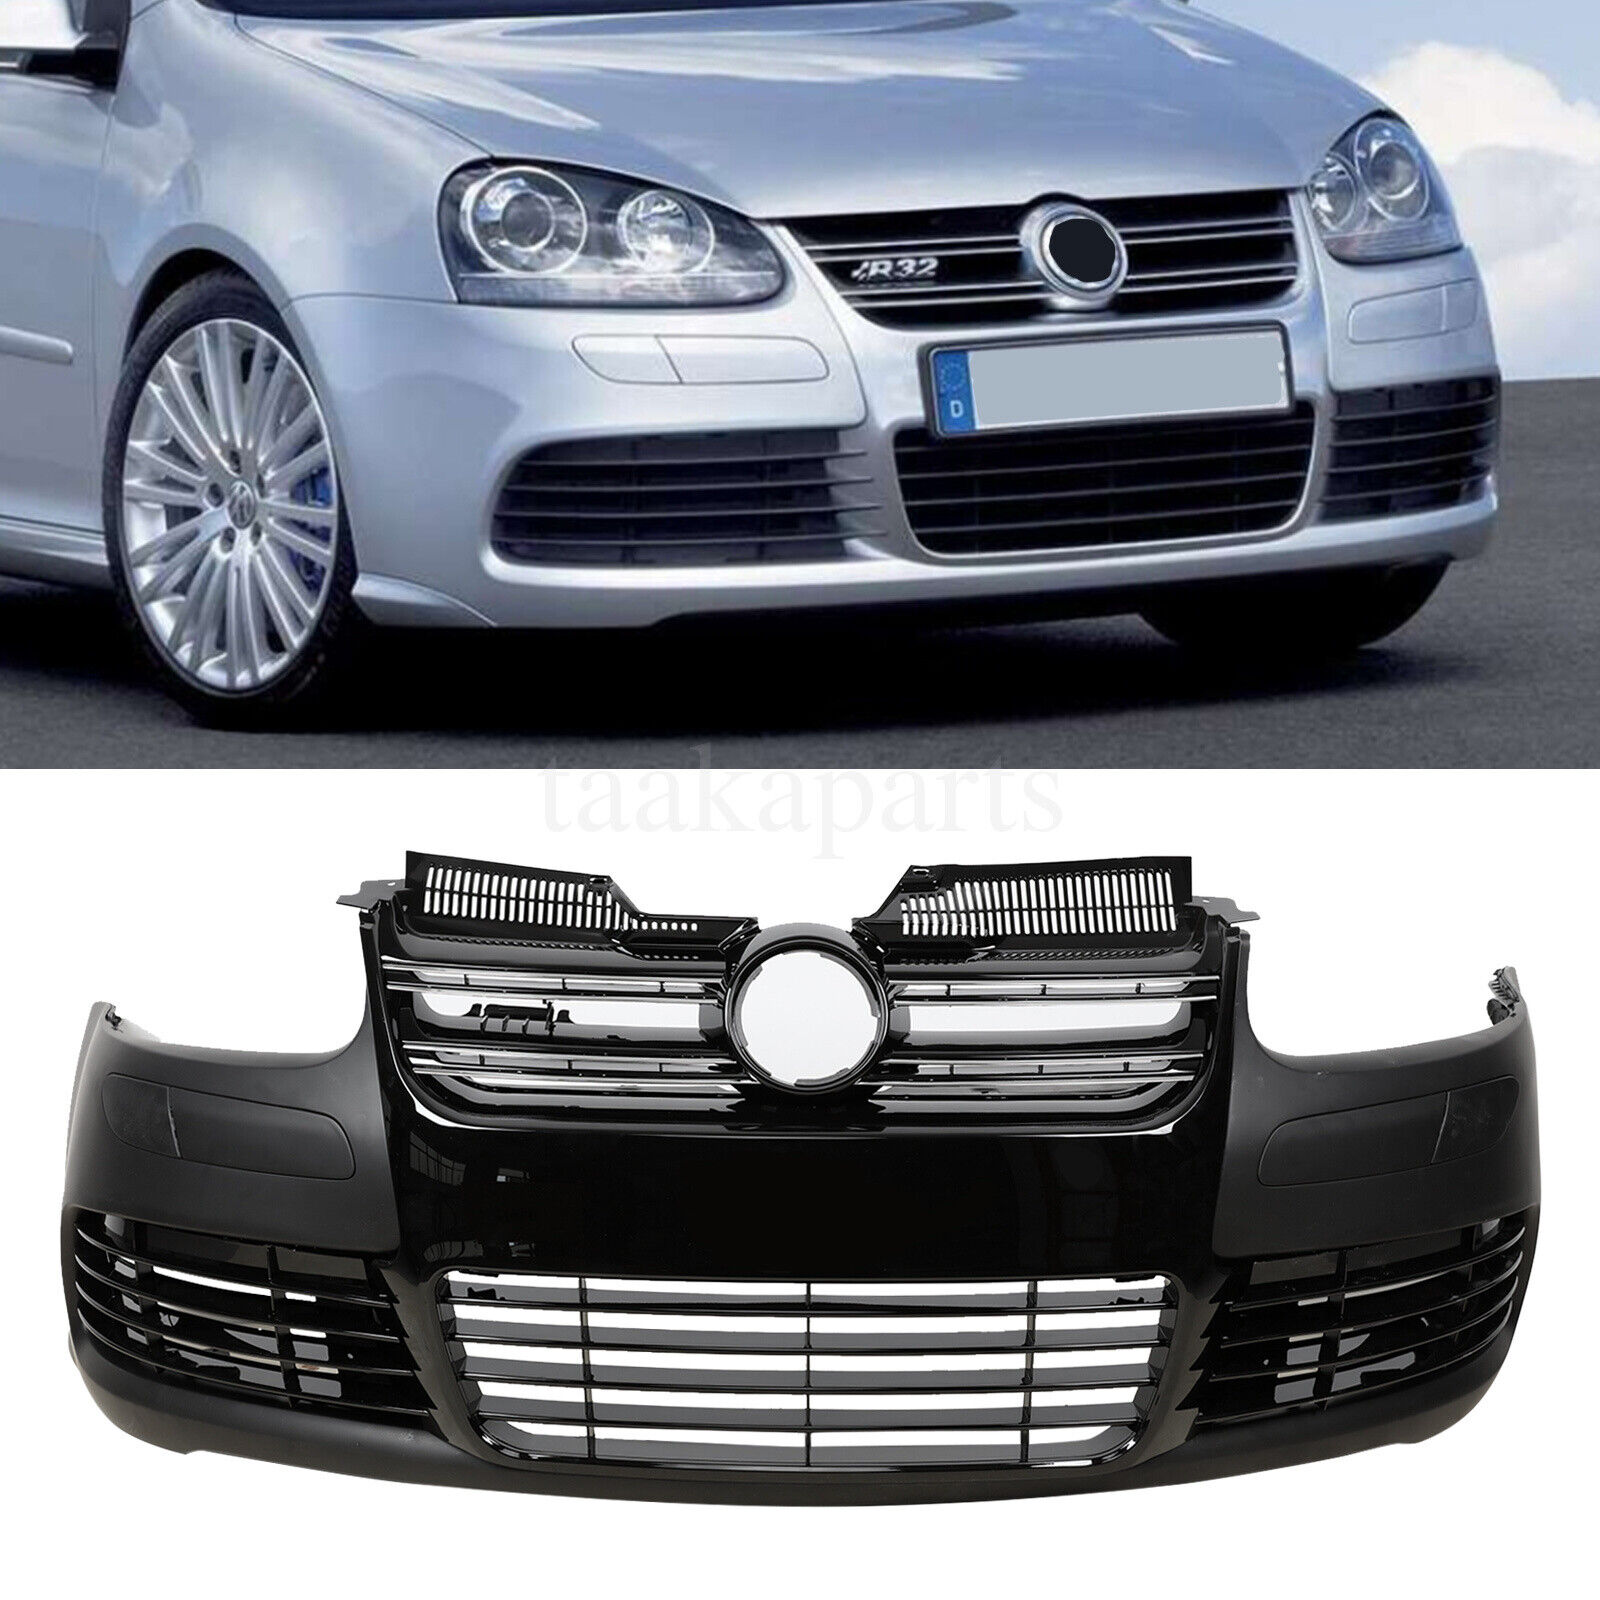 R32 Style Front Bumper Cover W/ Grille For Volkswagen Golf 5 VW MK5 2003-2008